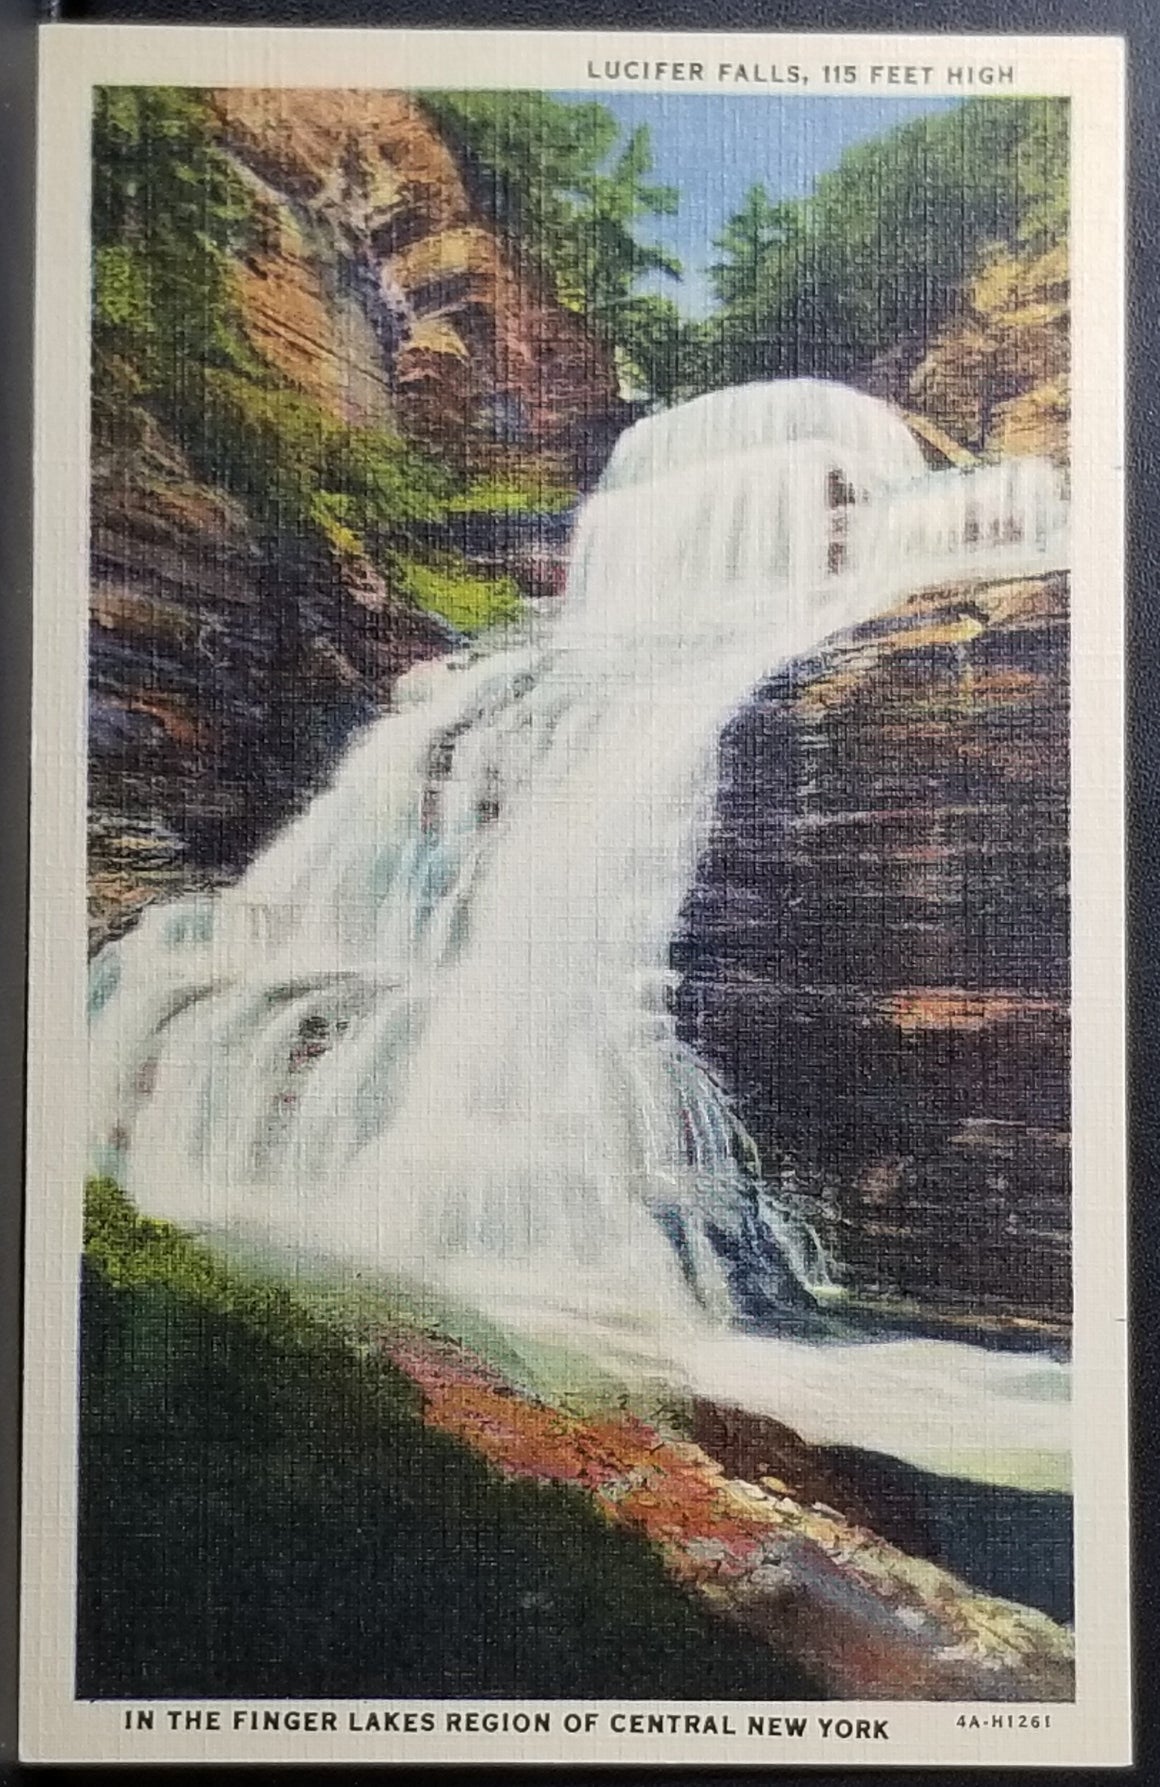 NY Scenic Postcard Finger Lakes Region Central New York Ithaca Treman State Park Lucifer Falls Linen Card